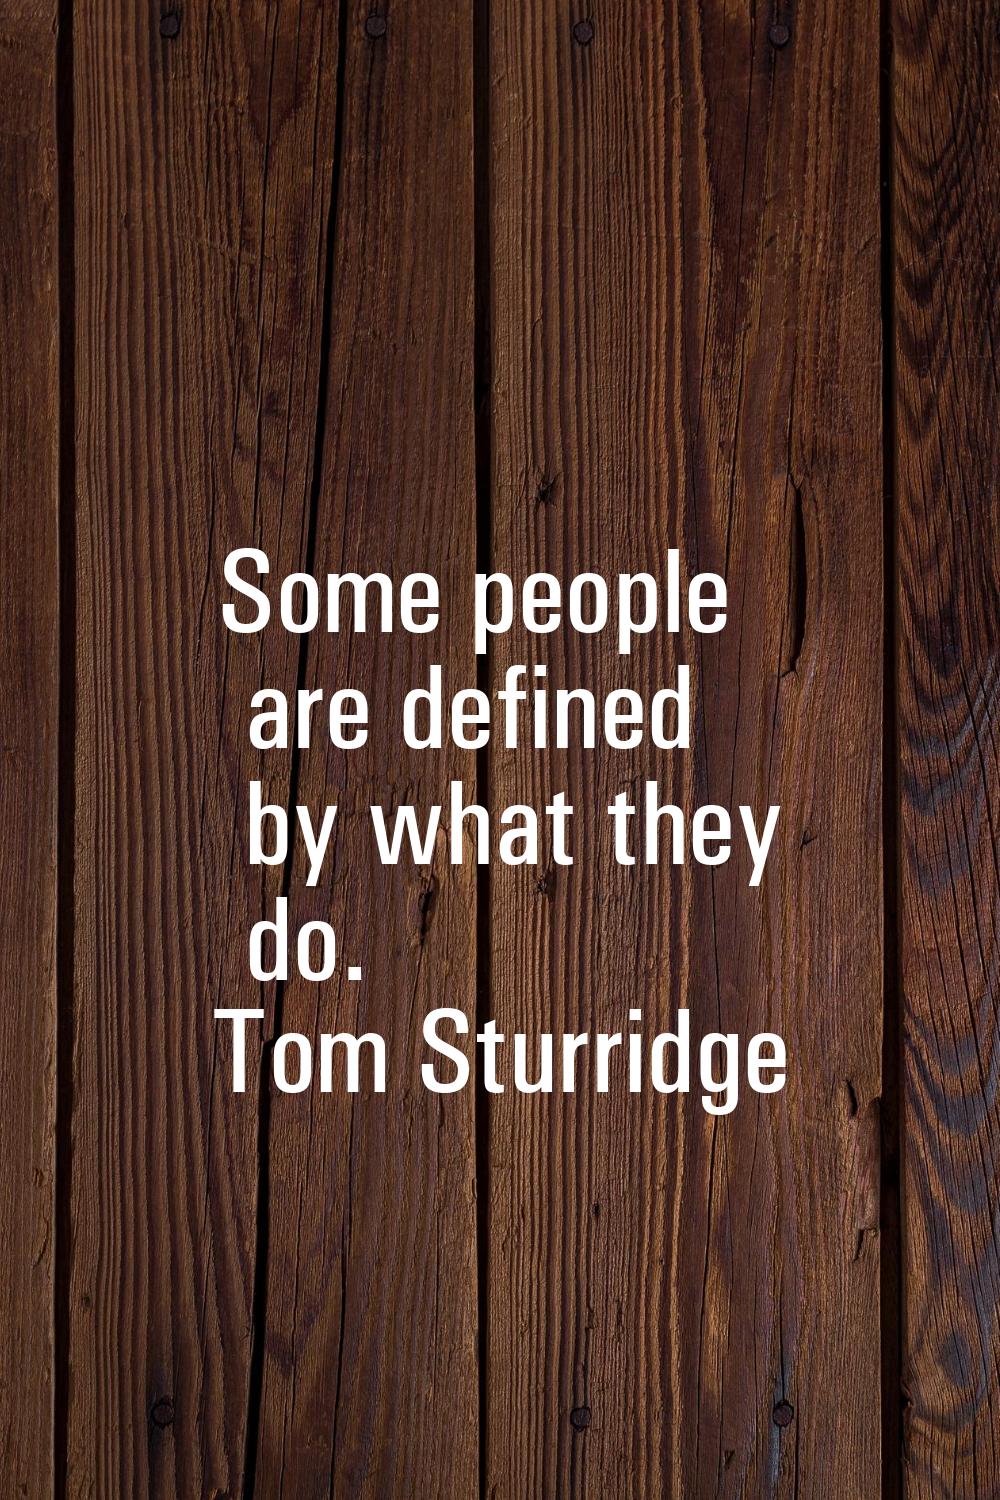 Some people are defined by what they do.